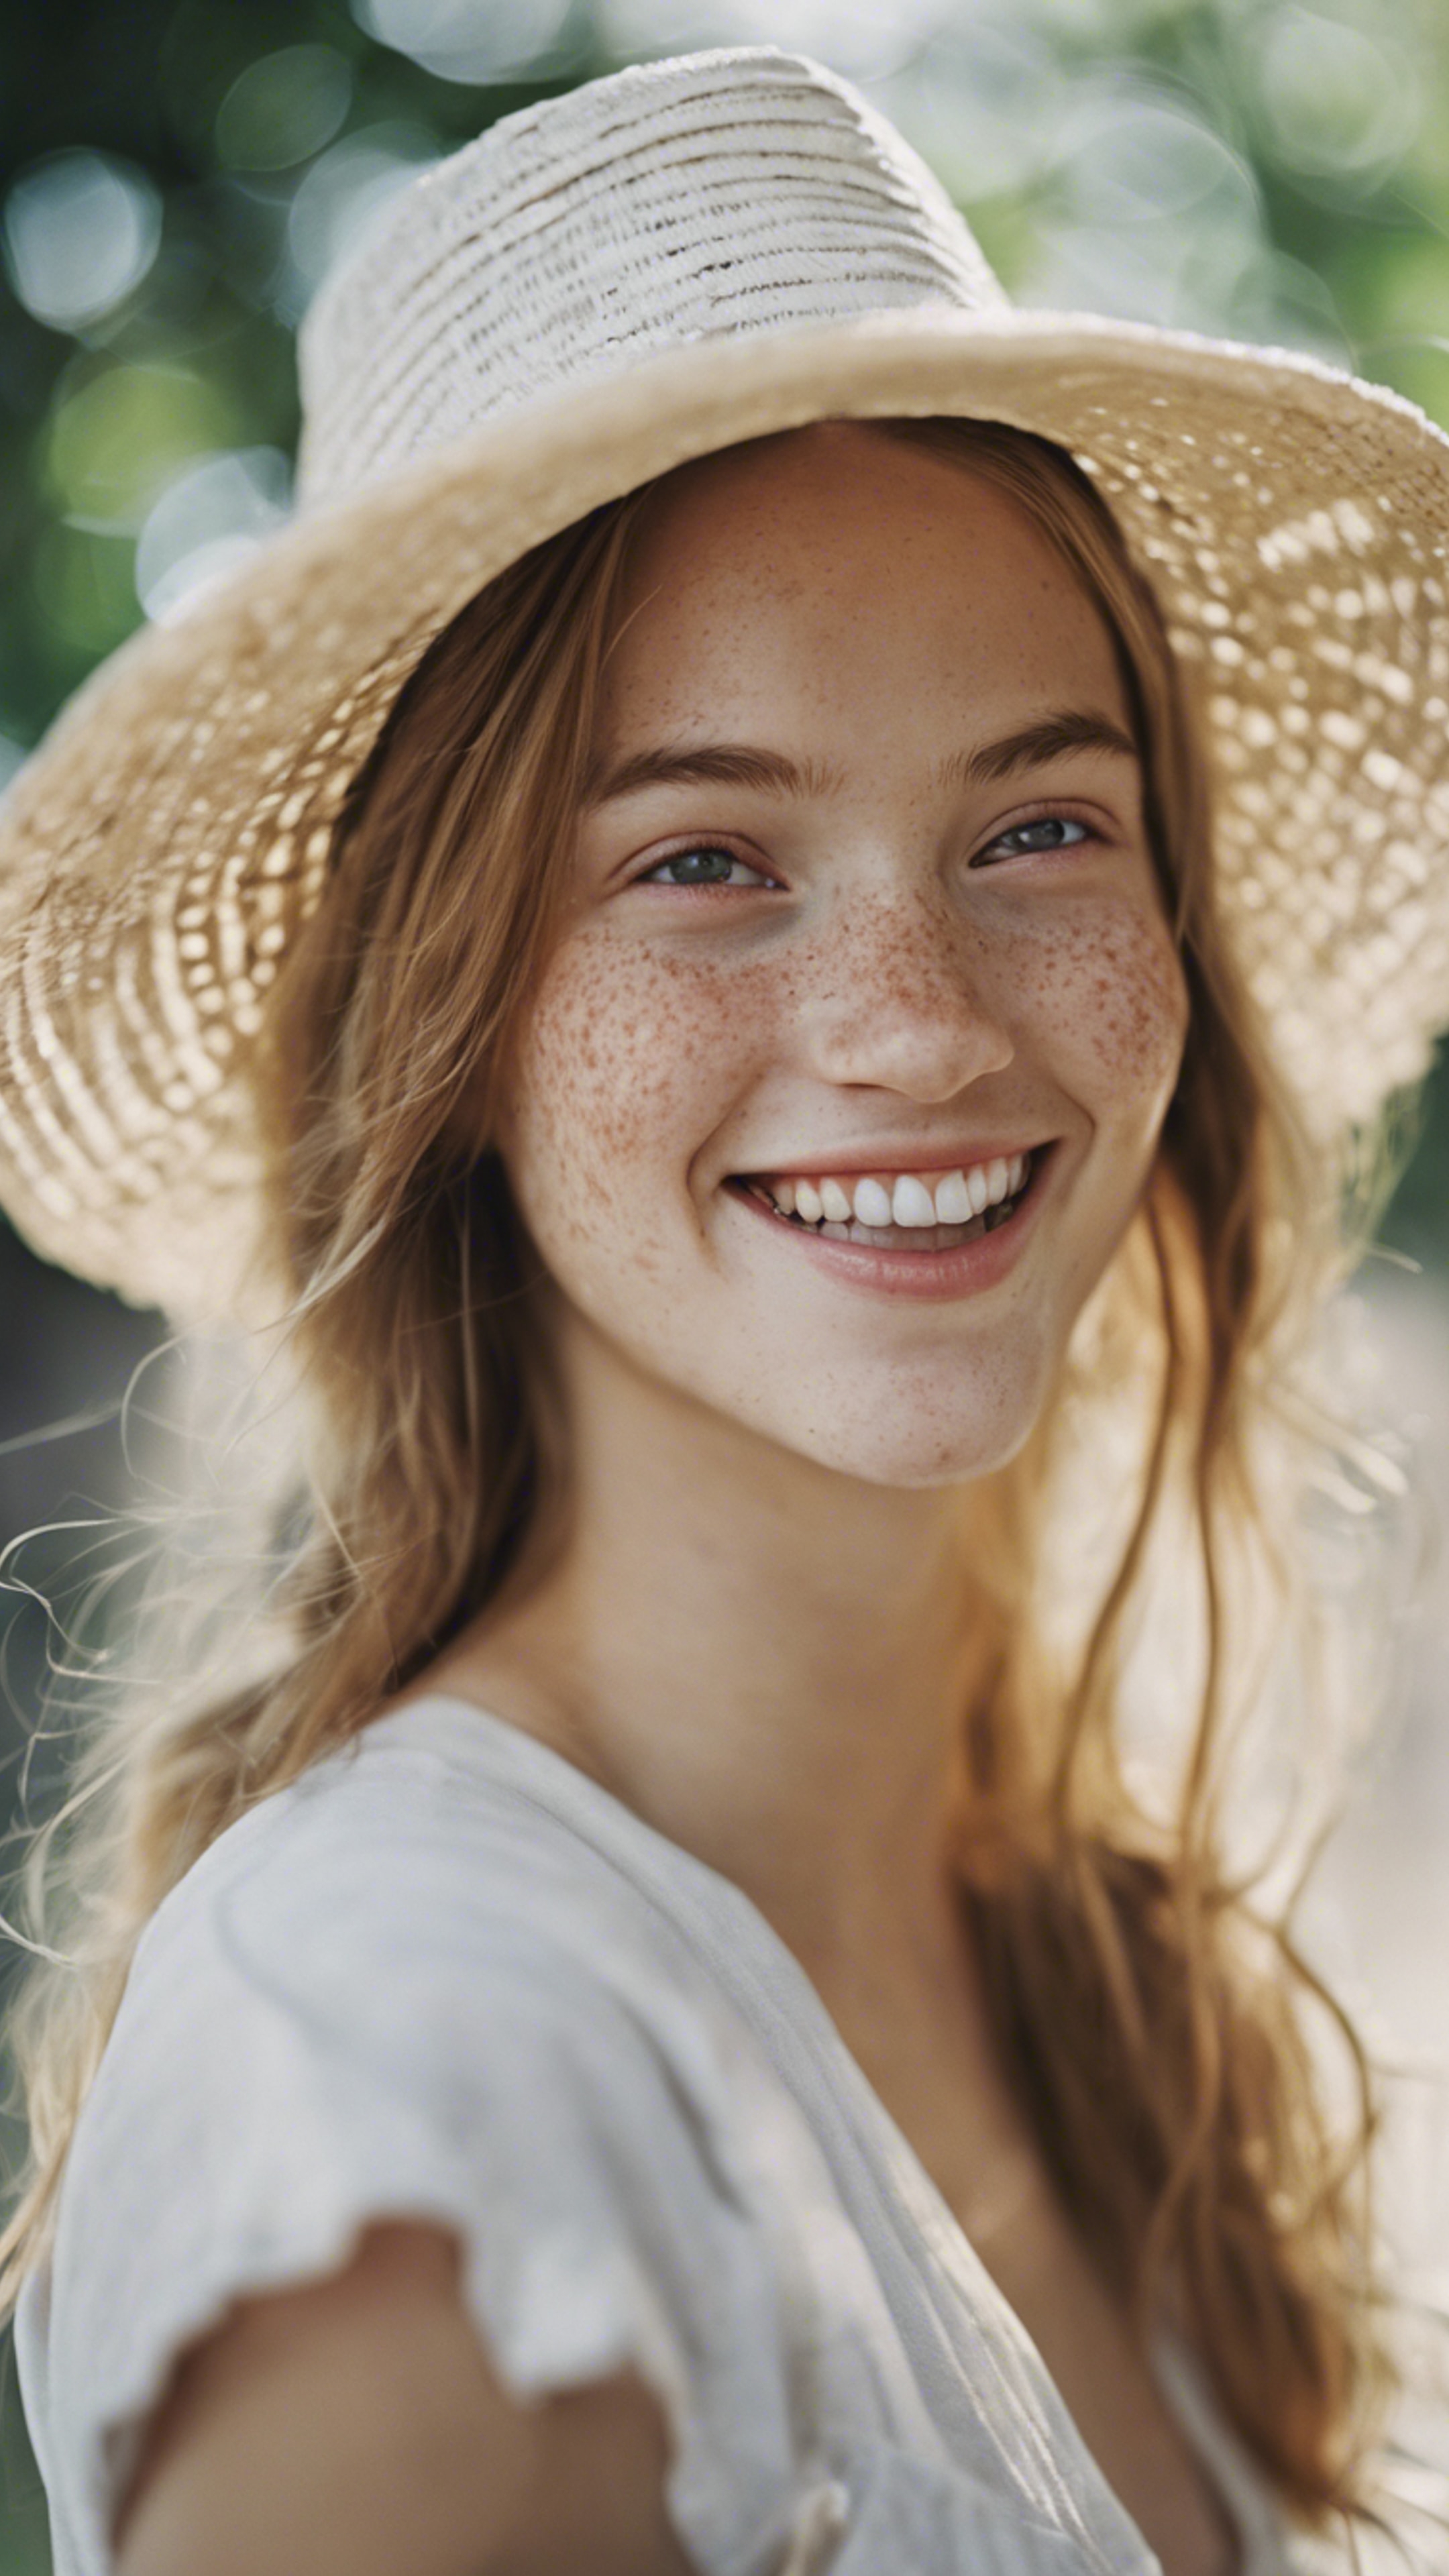 A portrait of a cute girl with freckles and a big smile, wearing a white straw hat. کاغذ دیواری[344e43c9fe594ea98e55]